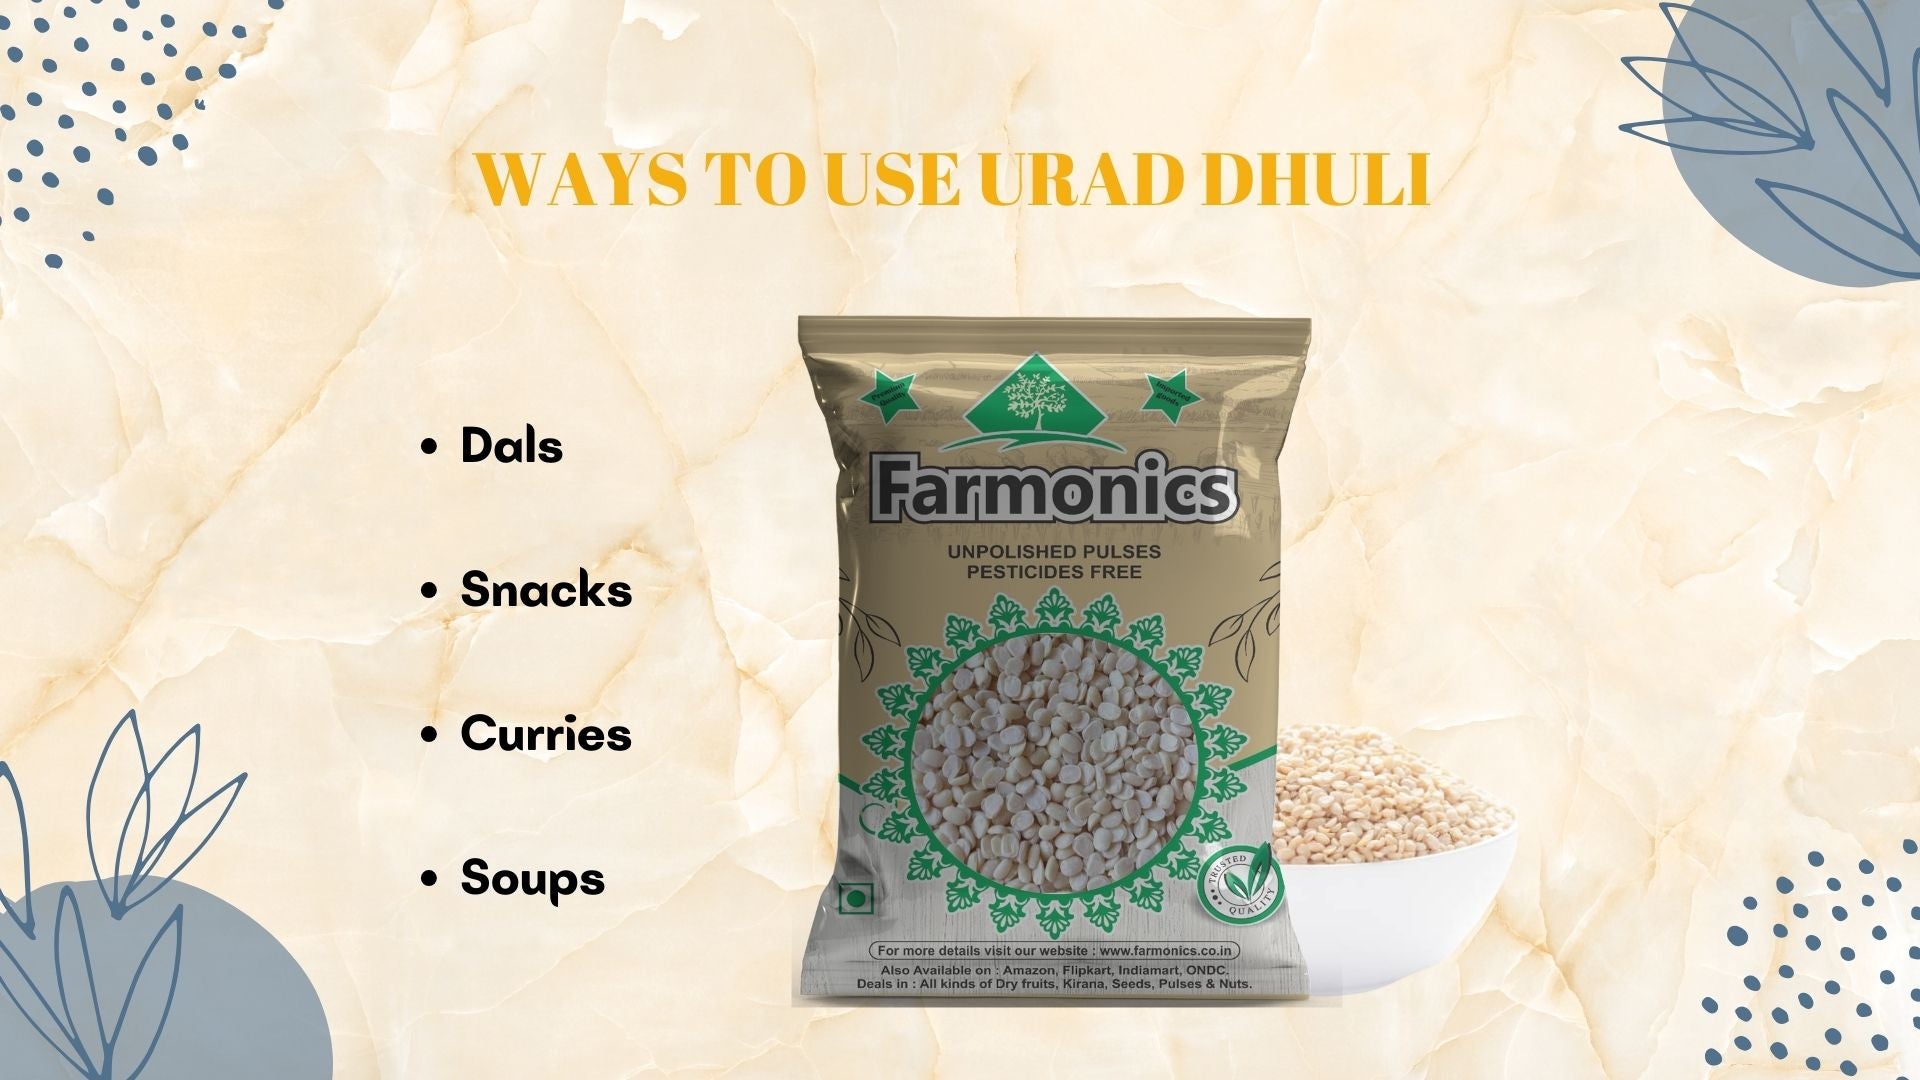  Ways in which you can use farmonics best quality   urad dhuli